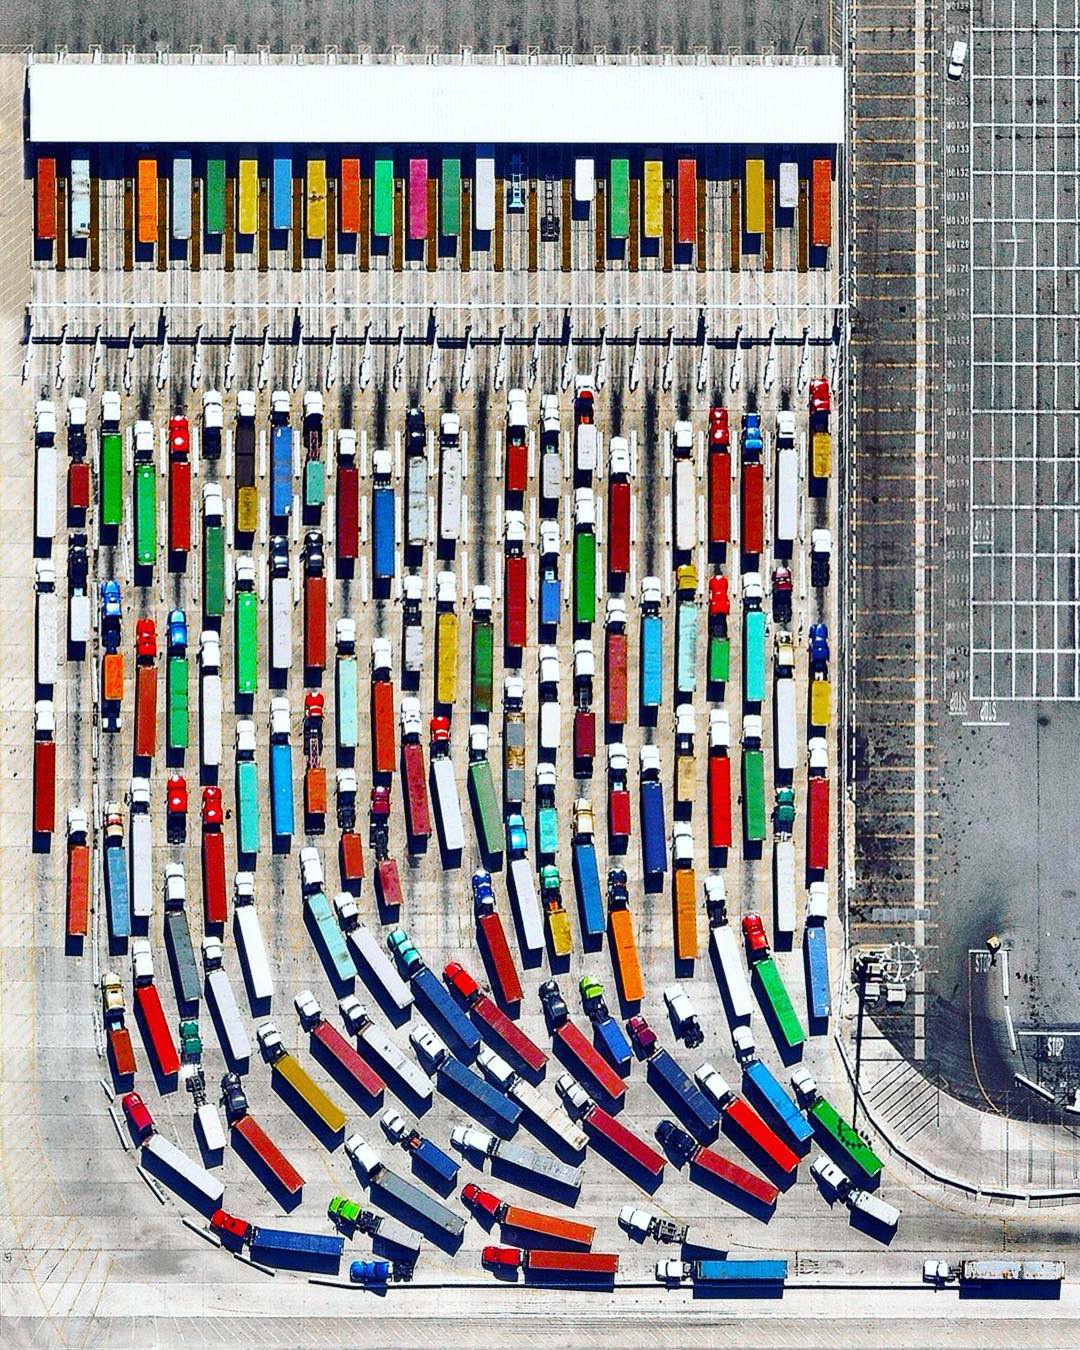 “Long-haul trucks wait in line to exit the Port of Los Angeles in California. It is estimated that there are approximately 3.5 million truck drivers in the United States and they drive nearly 140 billion miles on American highways every year. In total, 433 billion miles are covered annually by the entire population.”